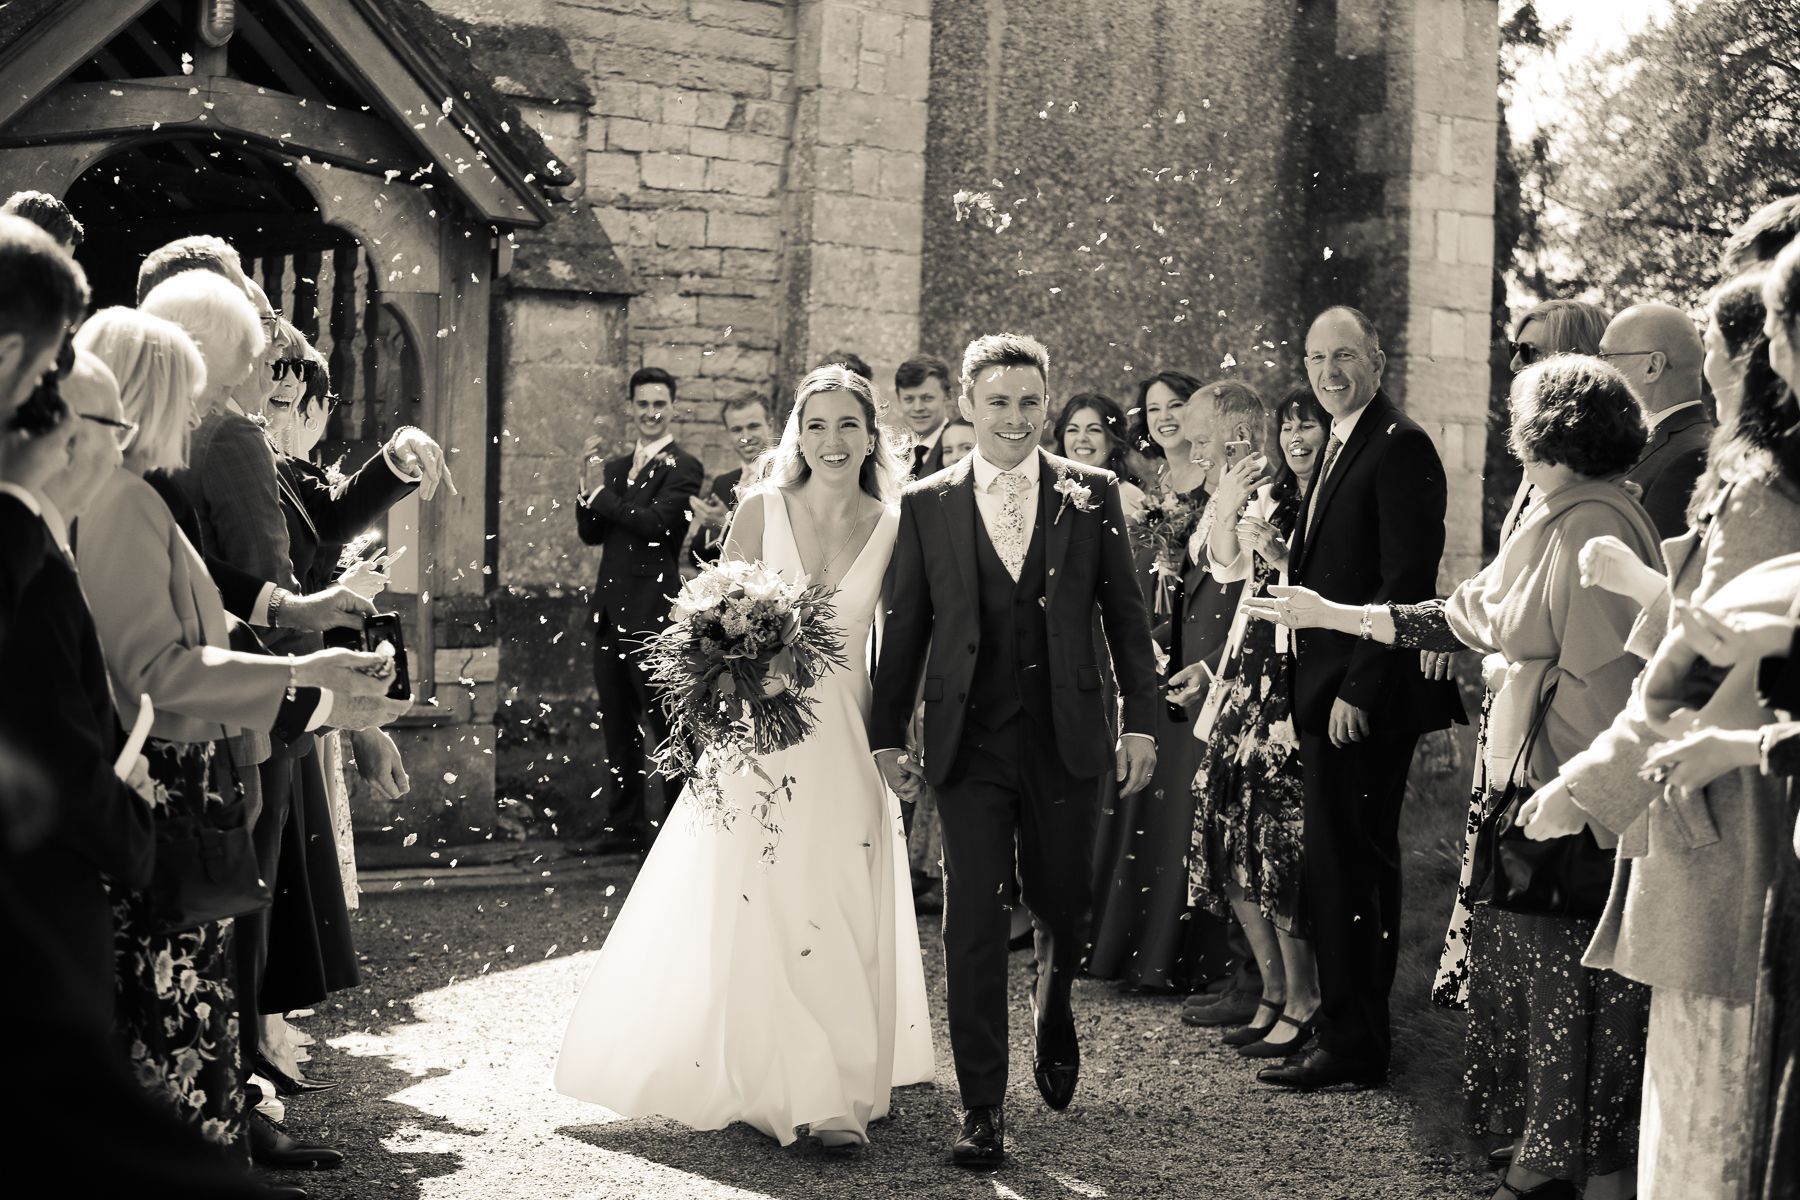 Natalie and Alex's Cotswold Wedding at Elmore Court in April